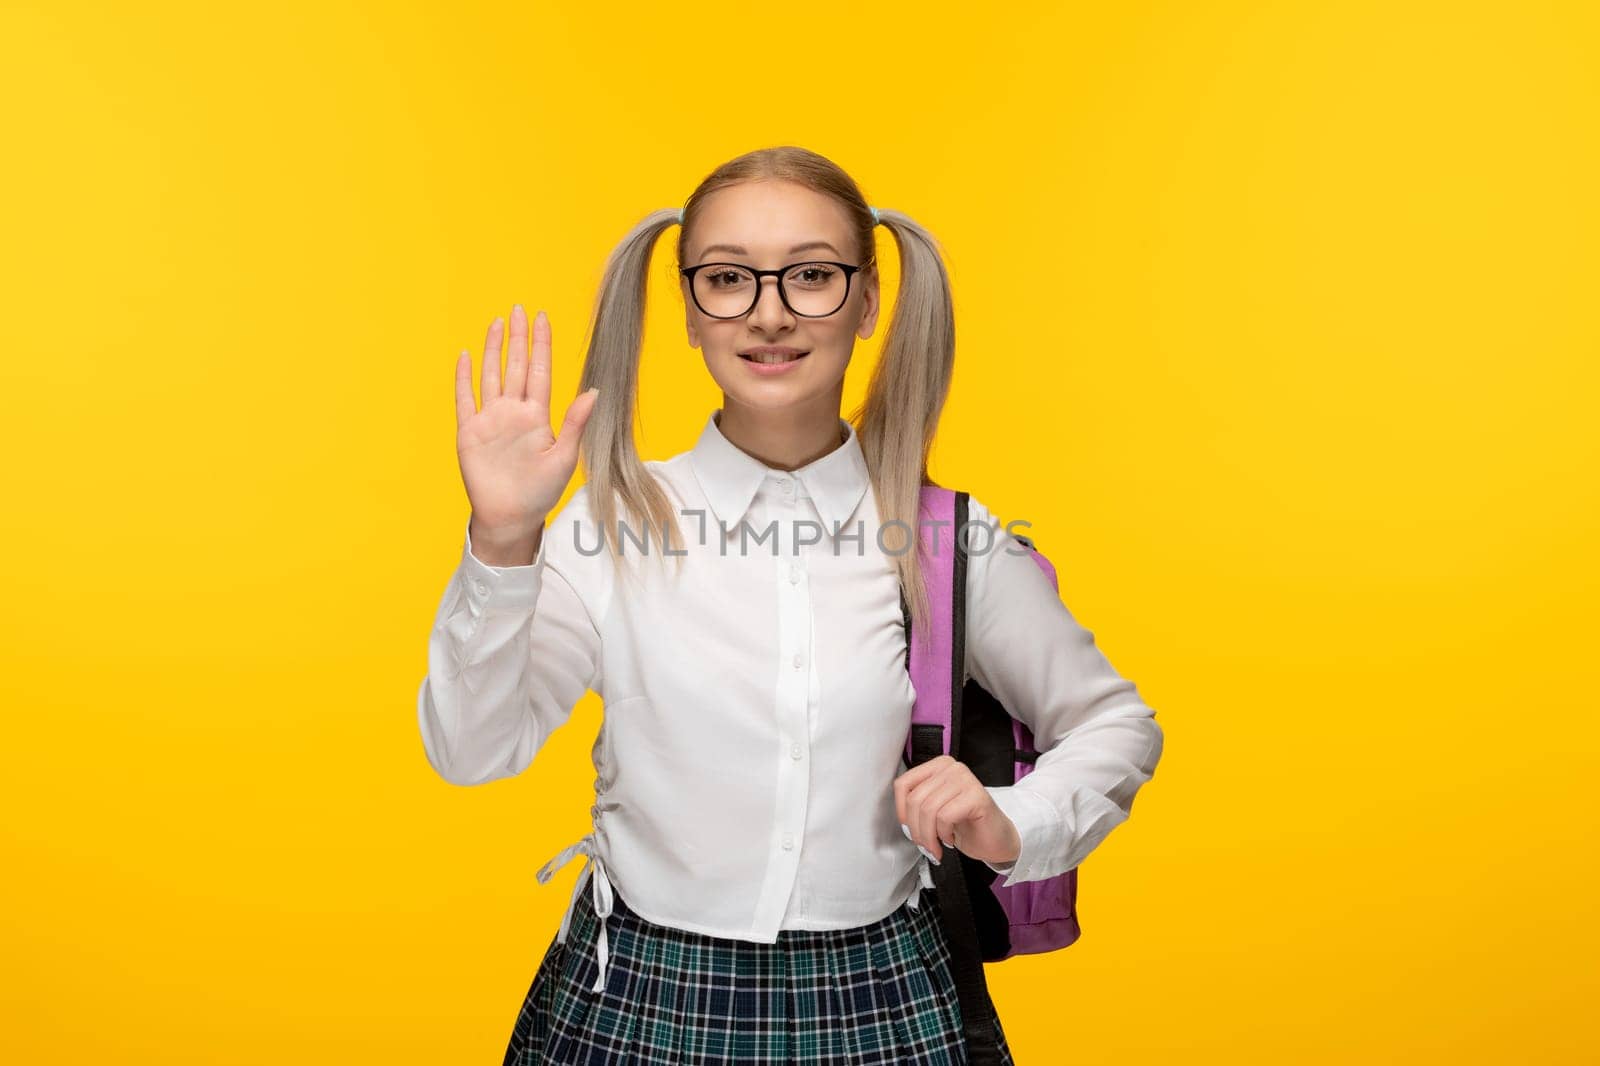 world book day blonde young school girl saying hi hand gesture smiling in glasses and uniform by Kamran